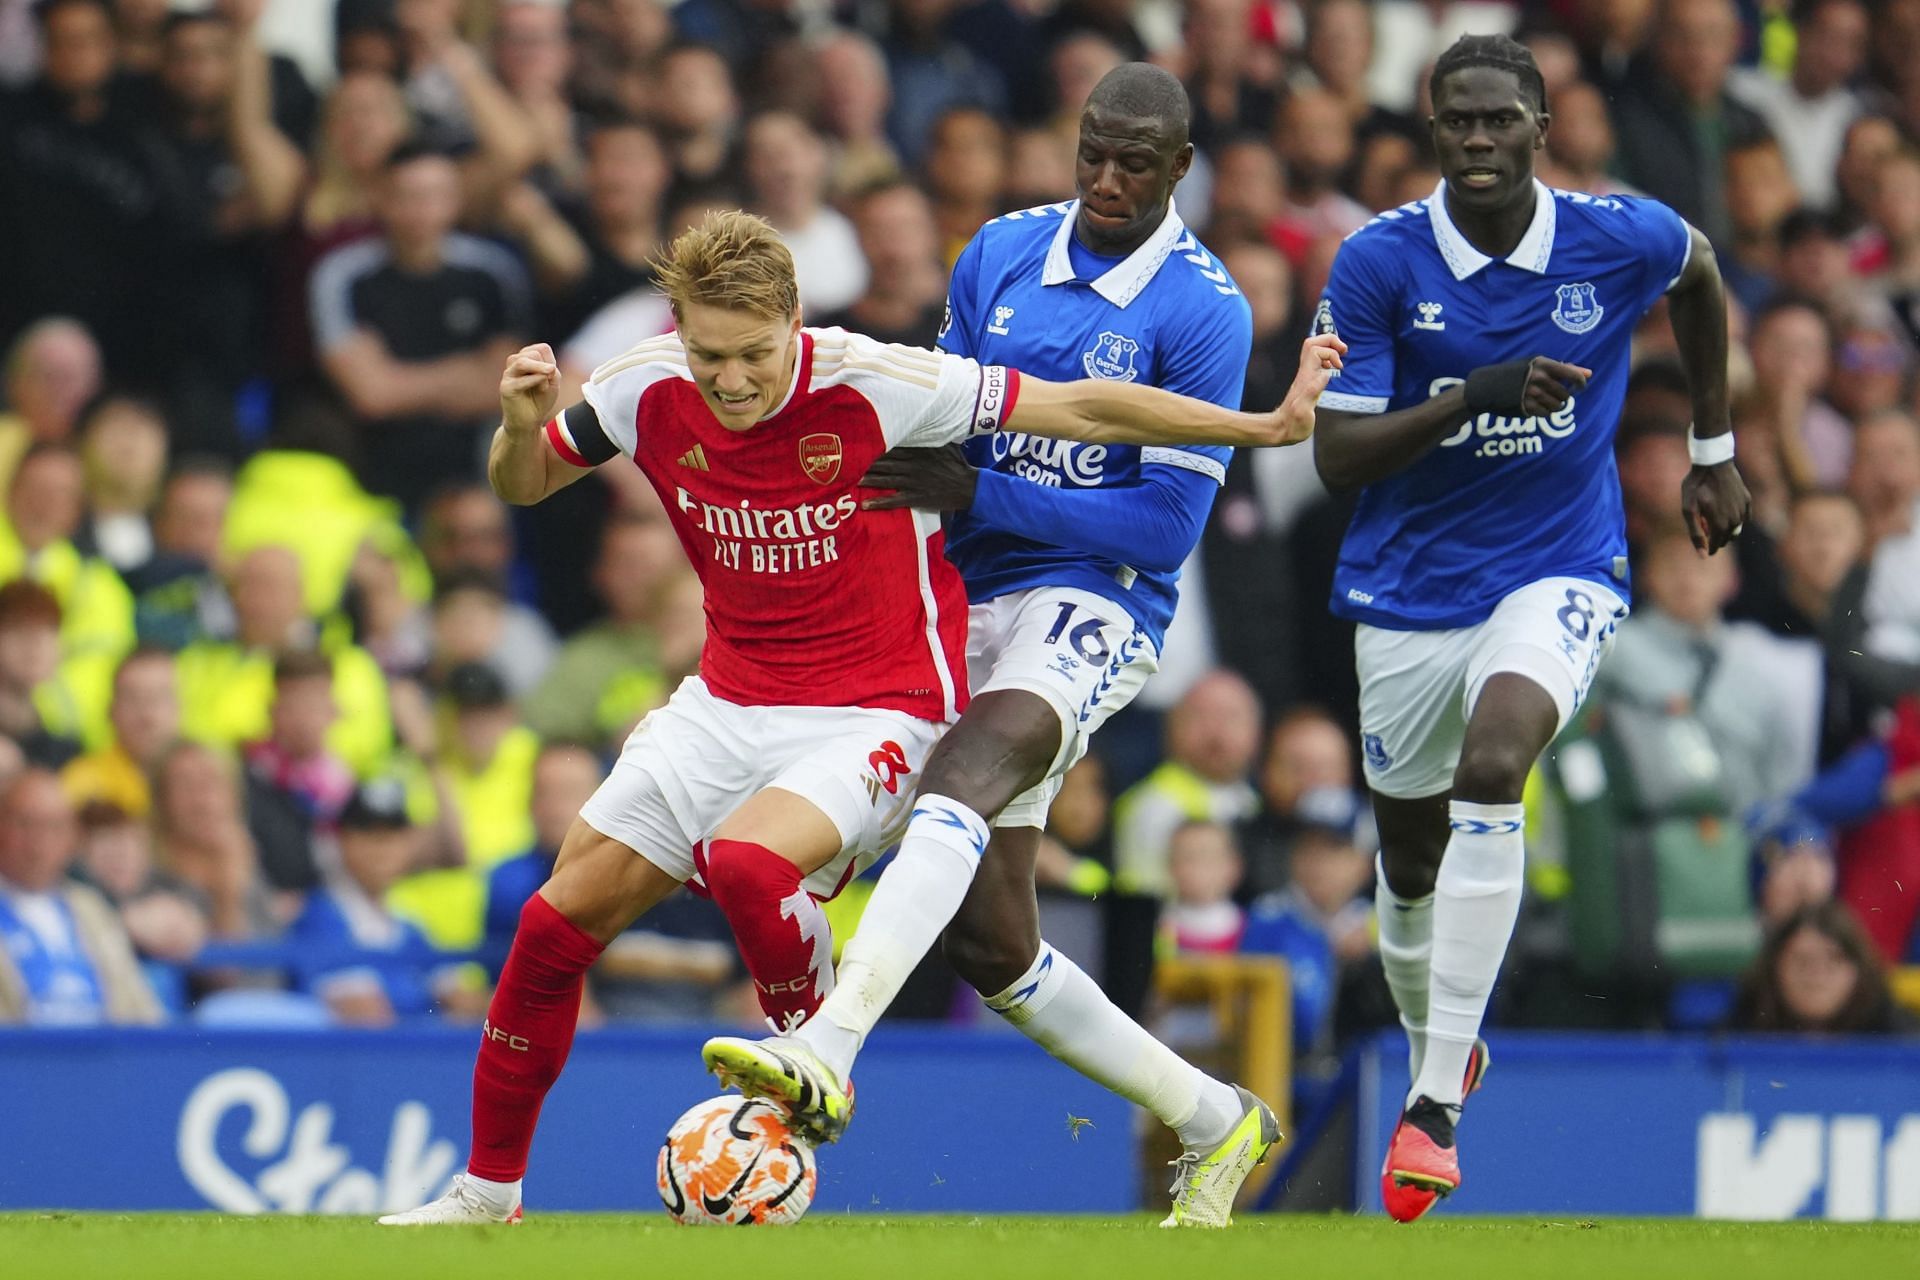 Martin Odegaard (left) is all set to commit his future at the Emirates.